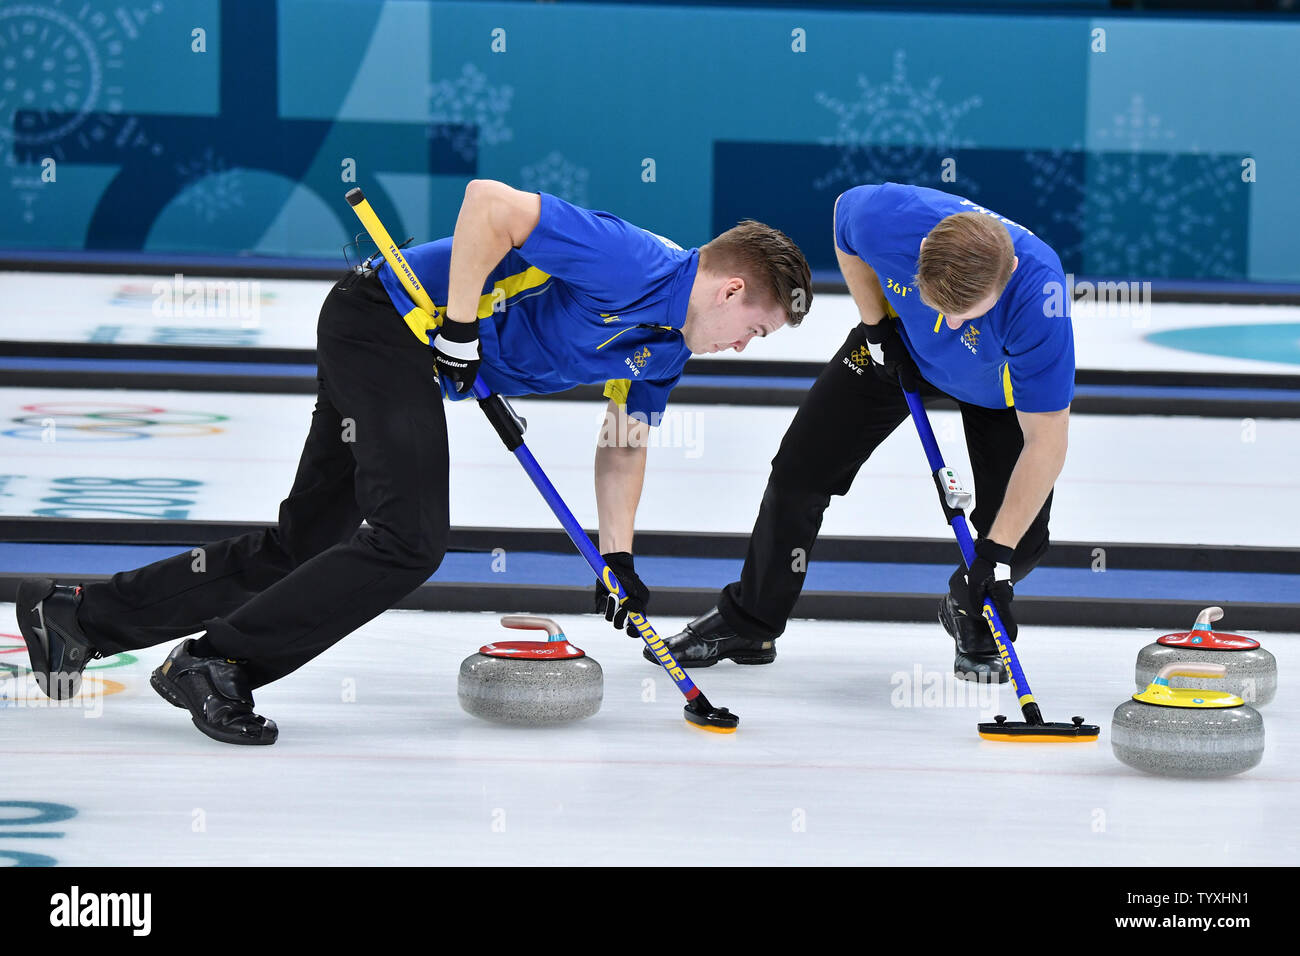 Members of Team Sweden sweep ahead of the stone during the Men's Curling  finals at the Pyeongchang 2018 Winter Olympics, in the Gangneung Curling  Centre in Gangneung, South Korea, on February 24,